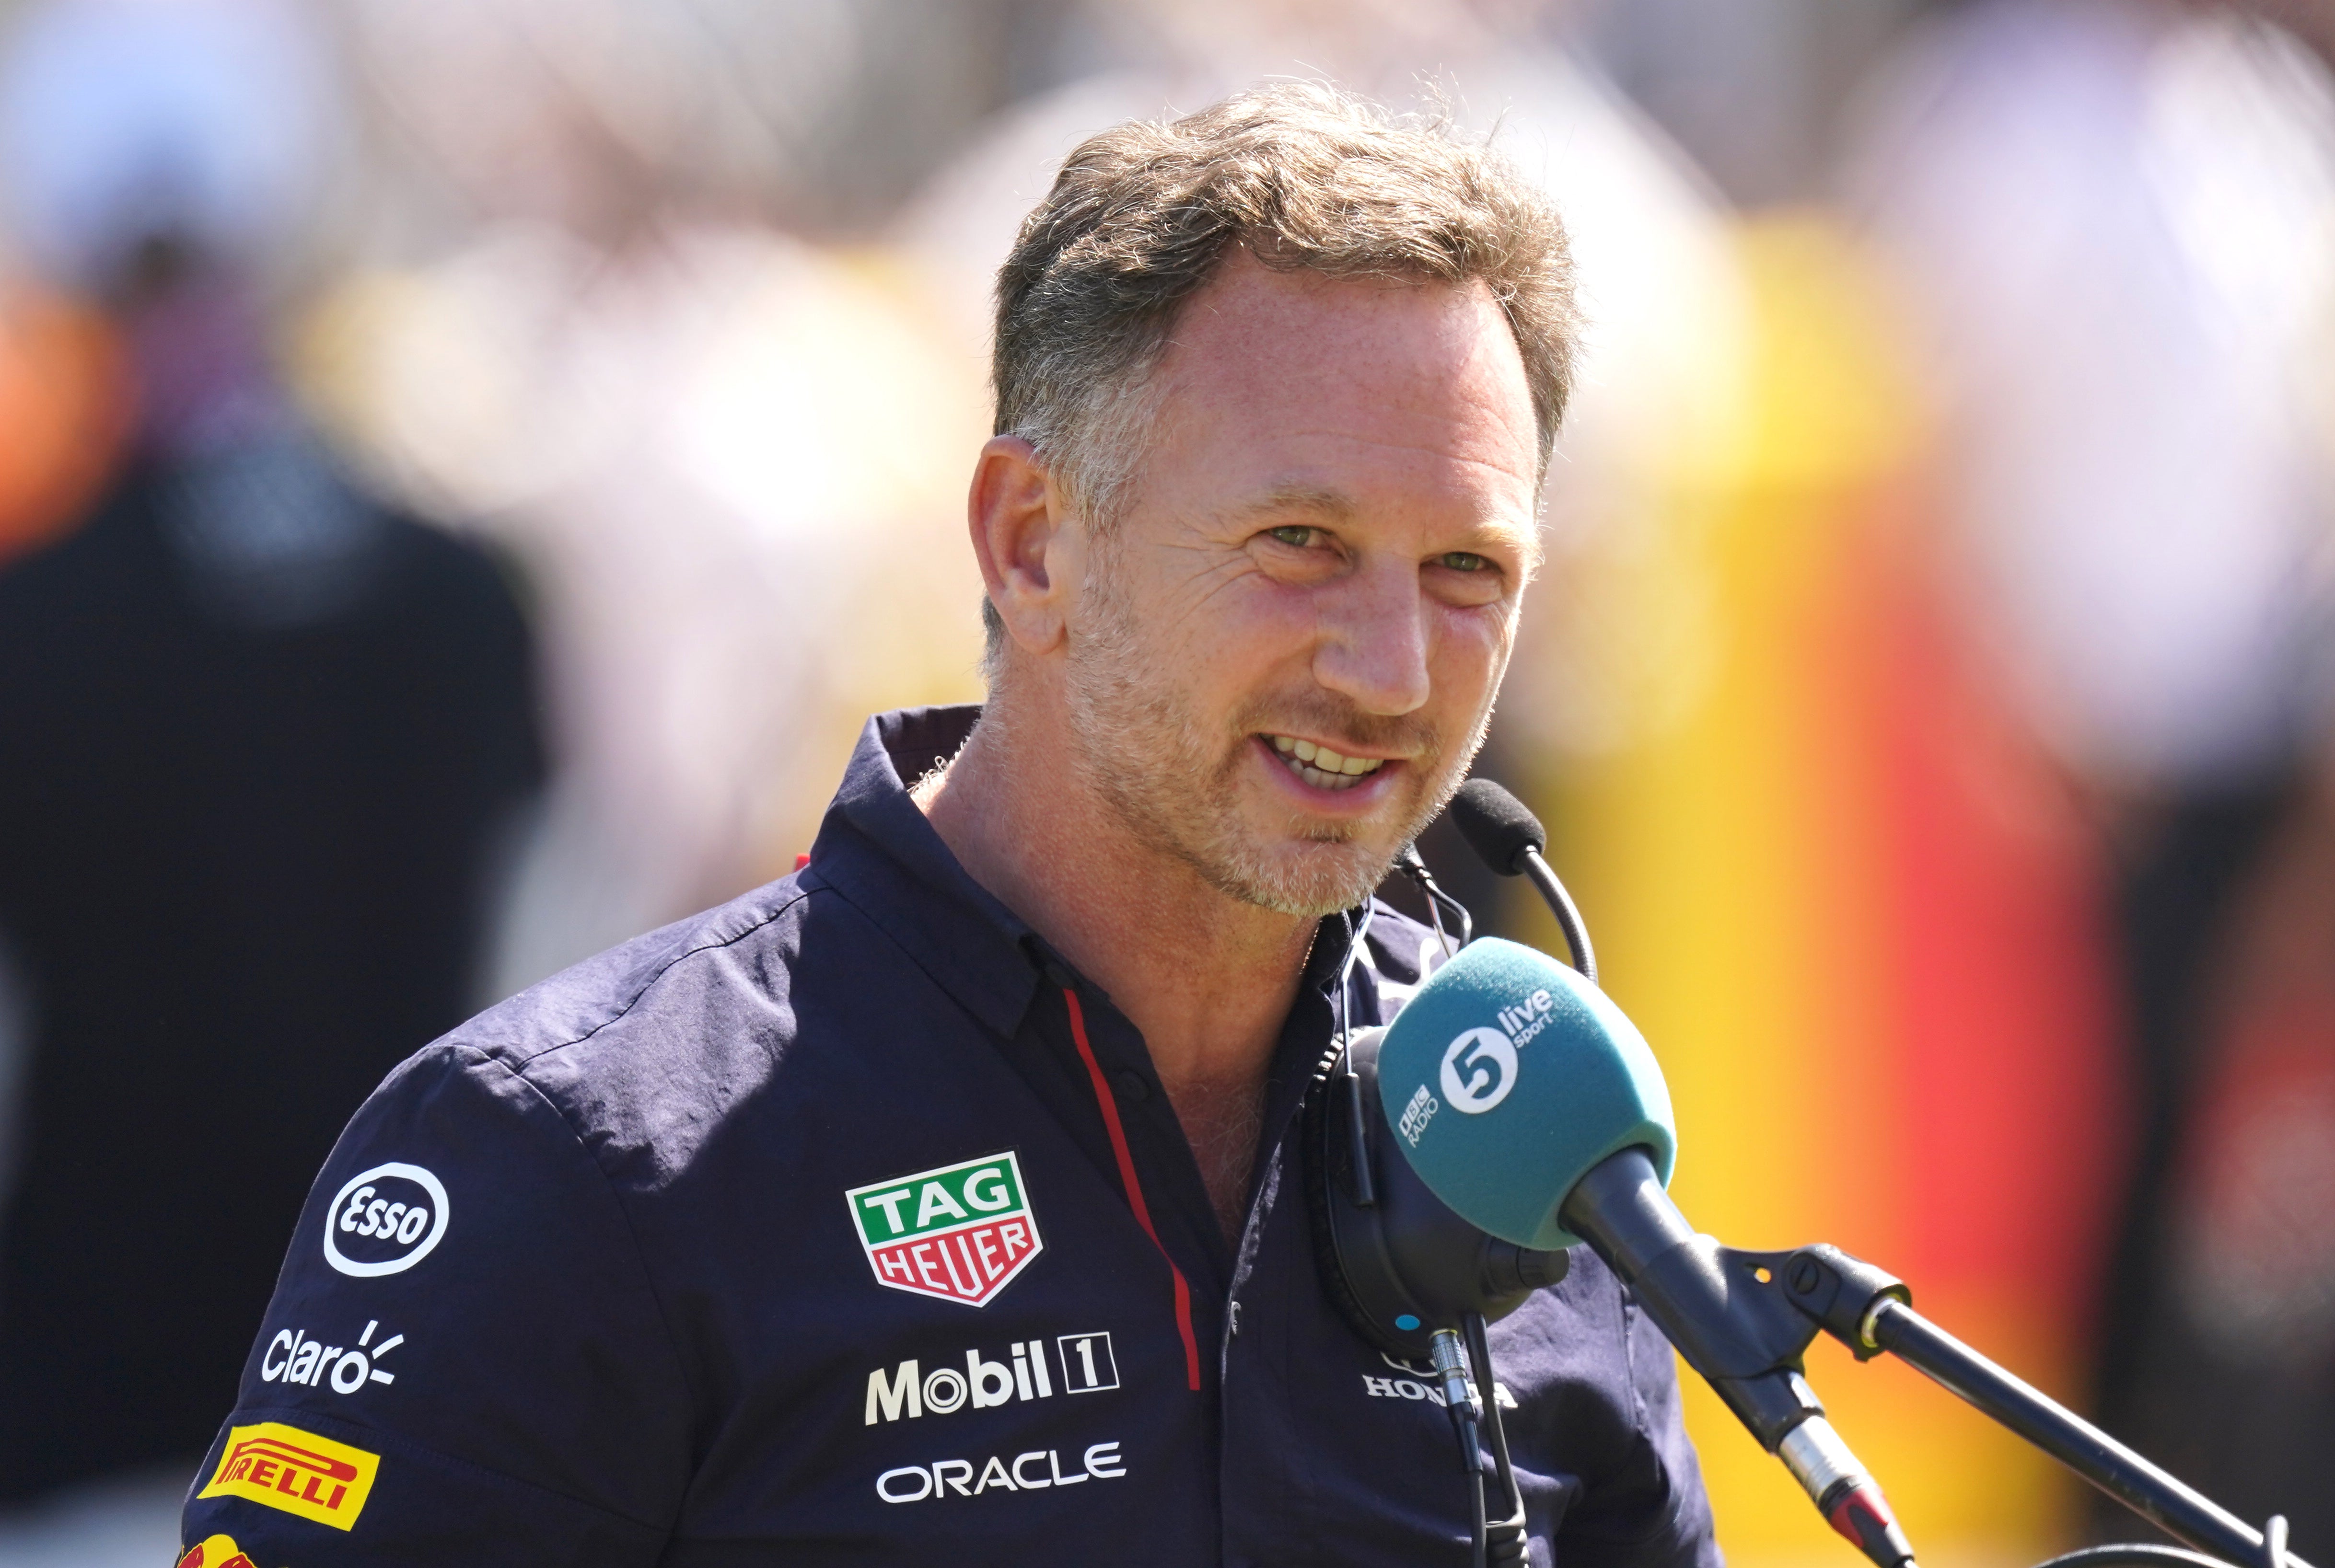 Red Bull’s Christian Horner made the bid during the Autosport Awards on Sunday